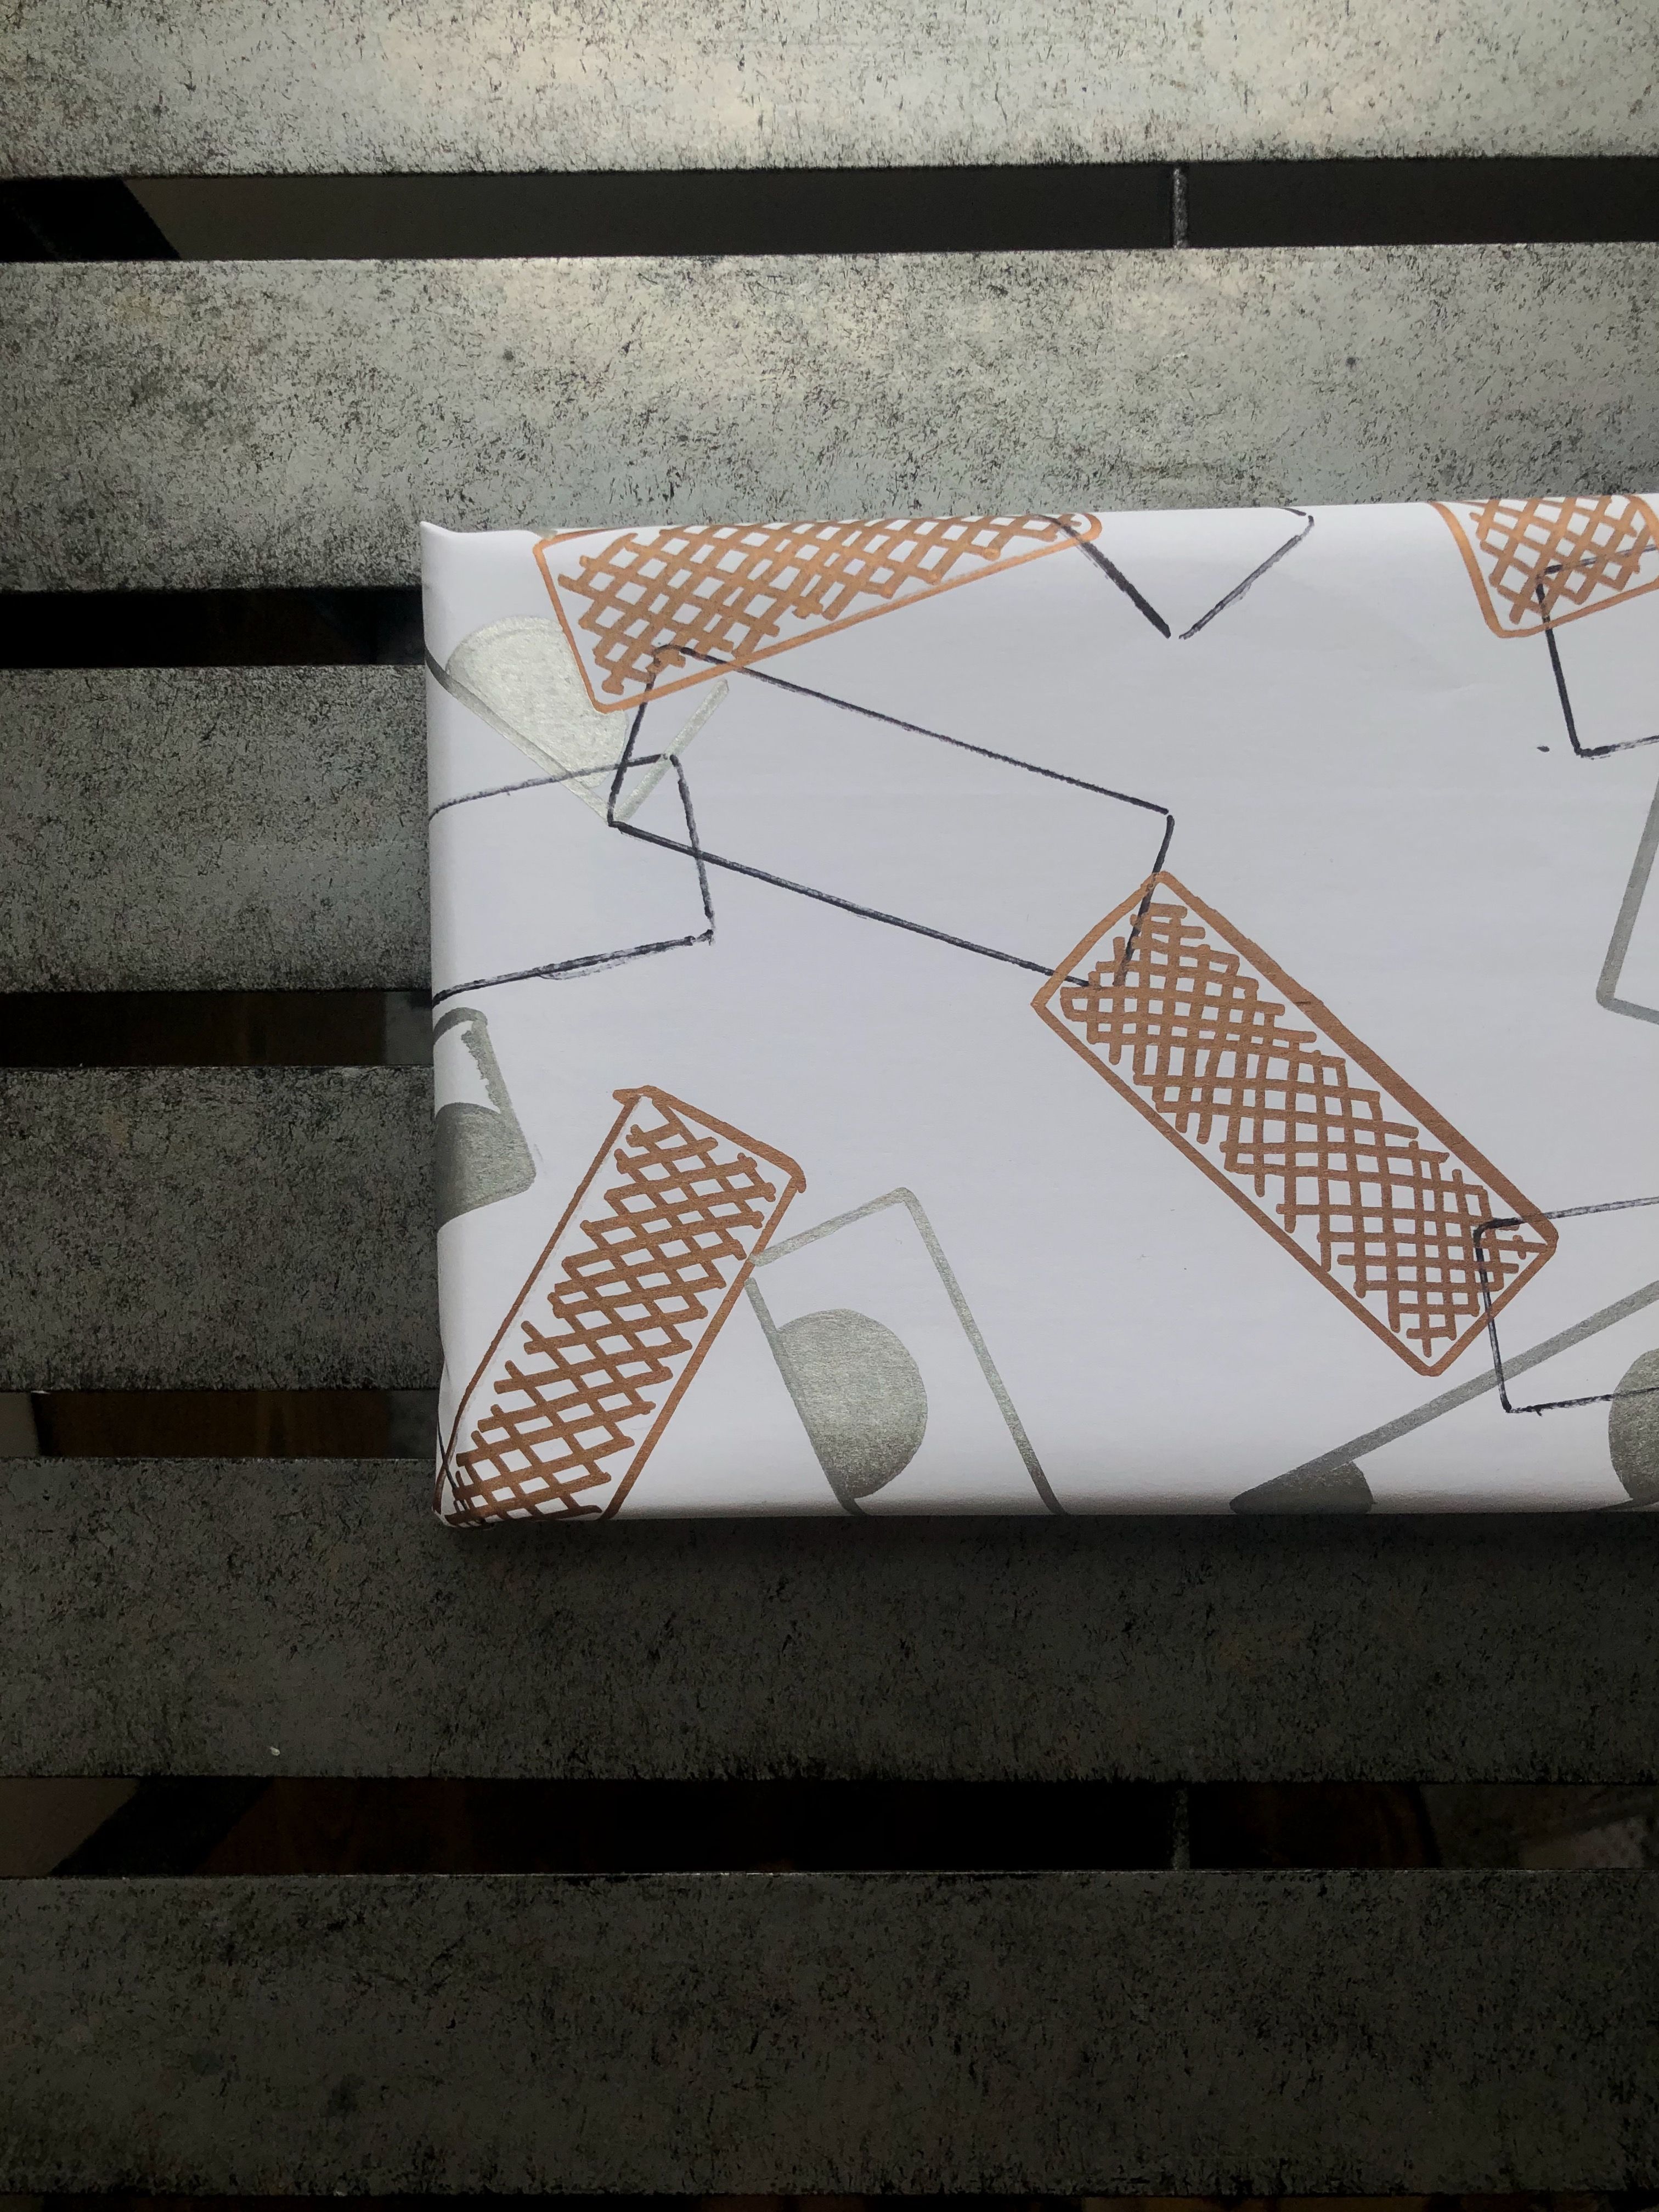 Use custom illustrations to make your own wrapping paper